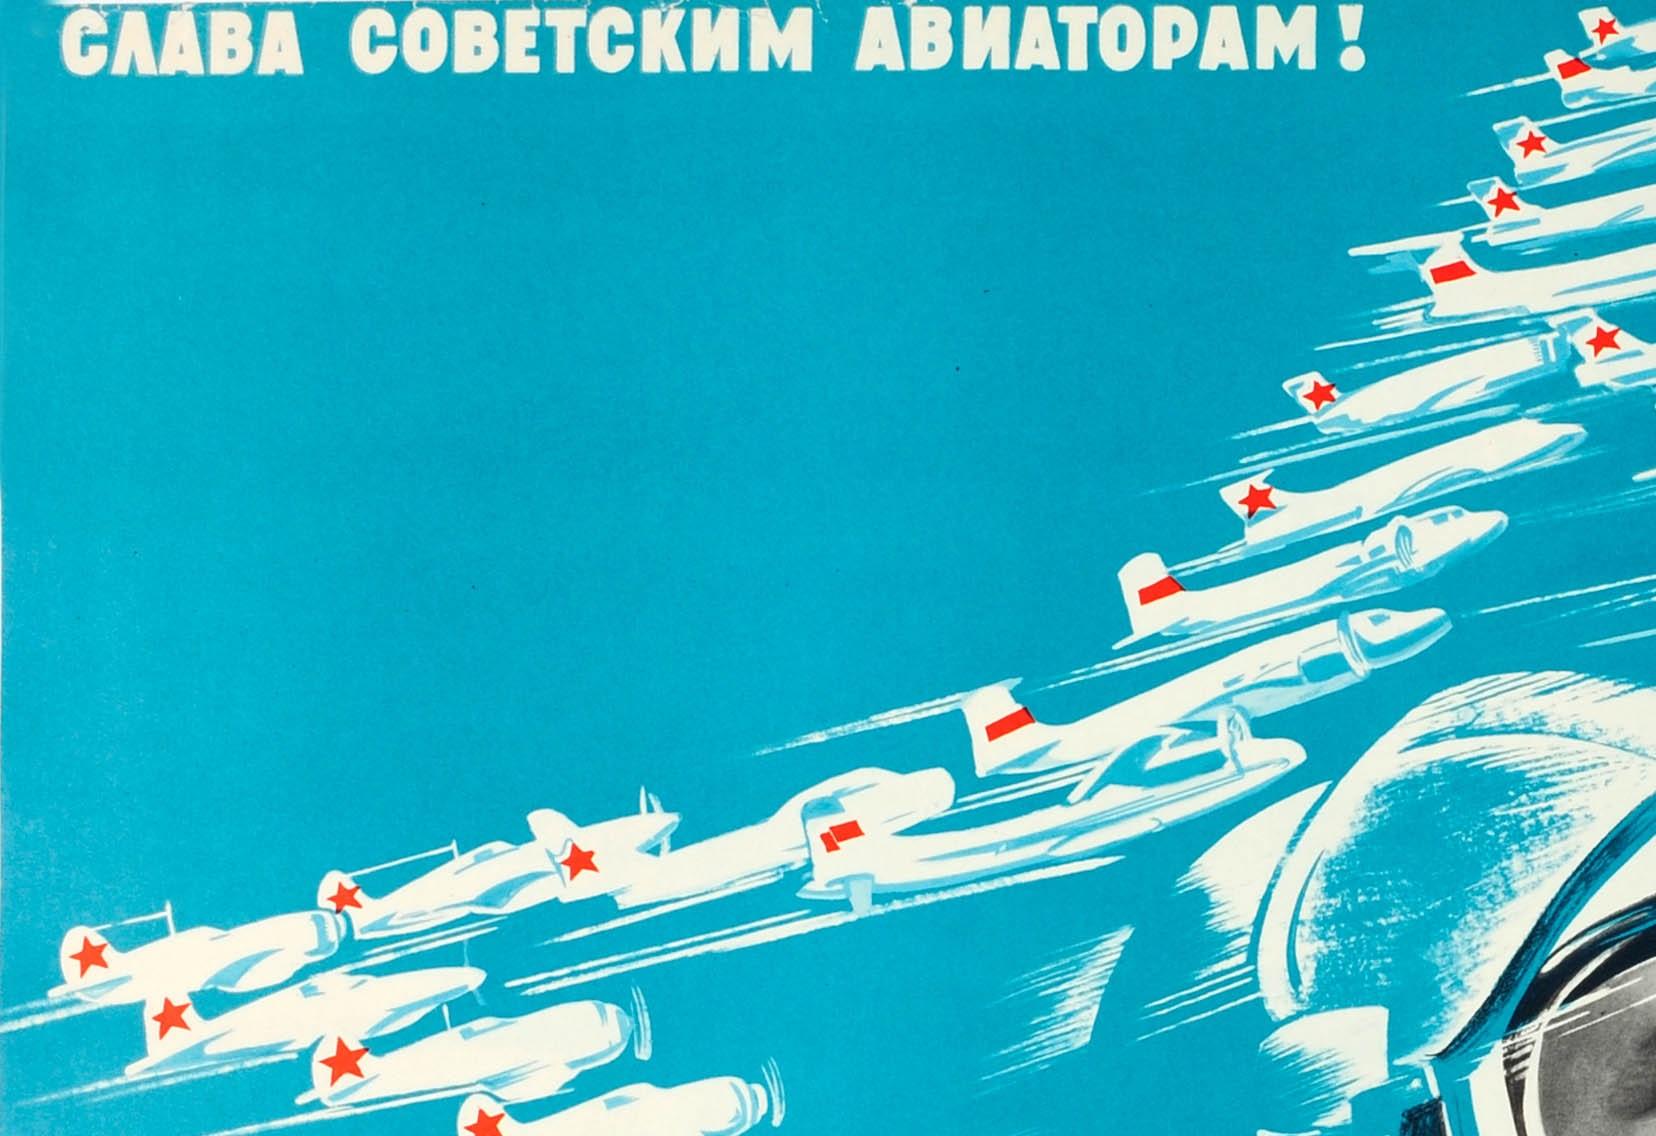 Original vintage Soviet propaganda poster - Glory to the Soviet Aviators! - featuring a dynamic design depicting all the planes and helicopters designed and produced in the USSR flying forward at speed with the older models on the left and new